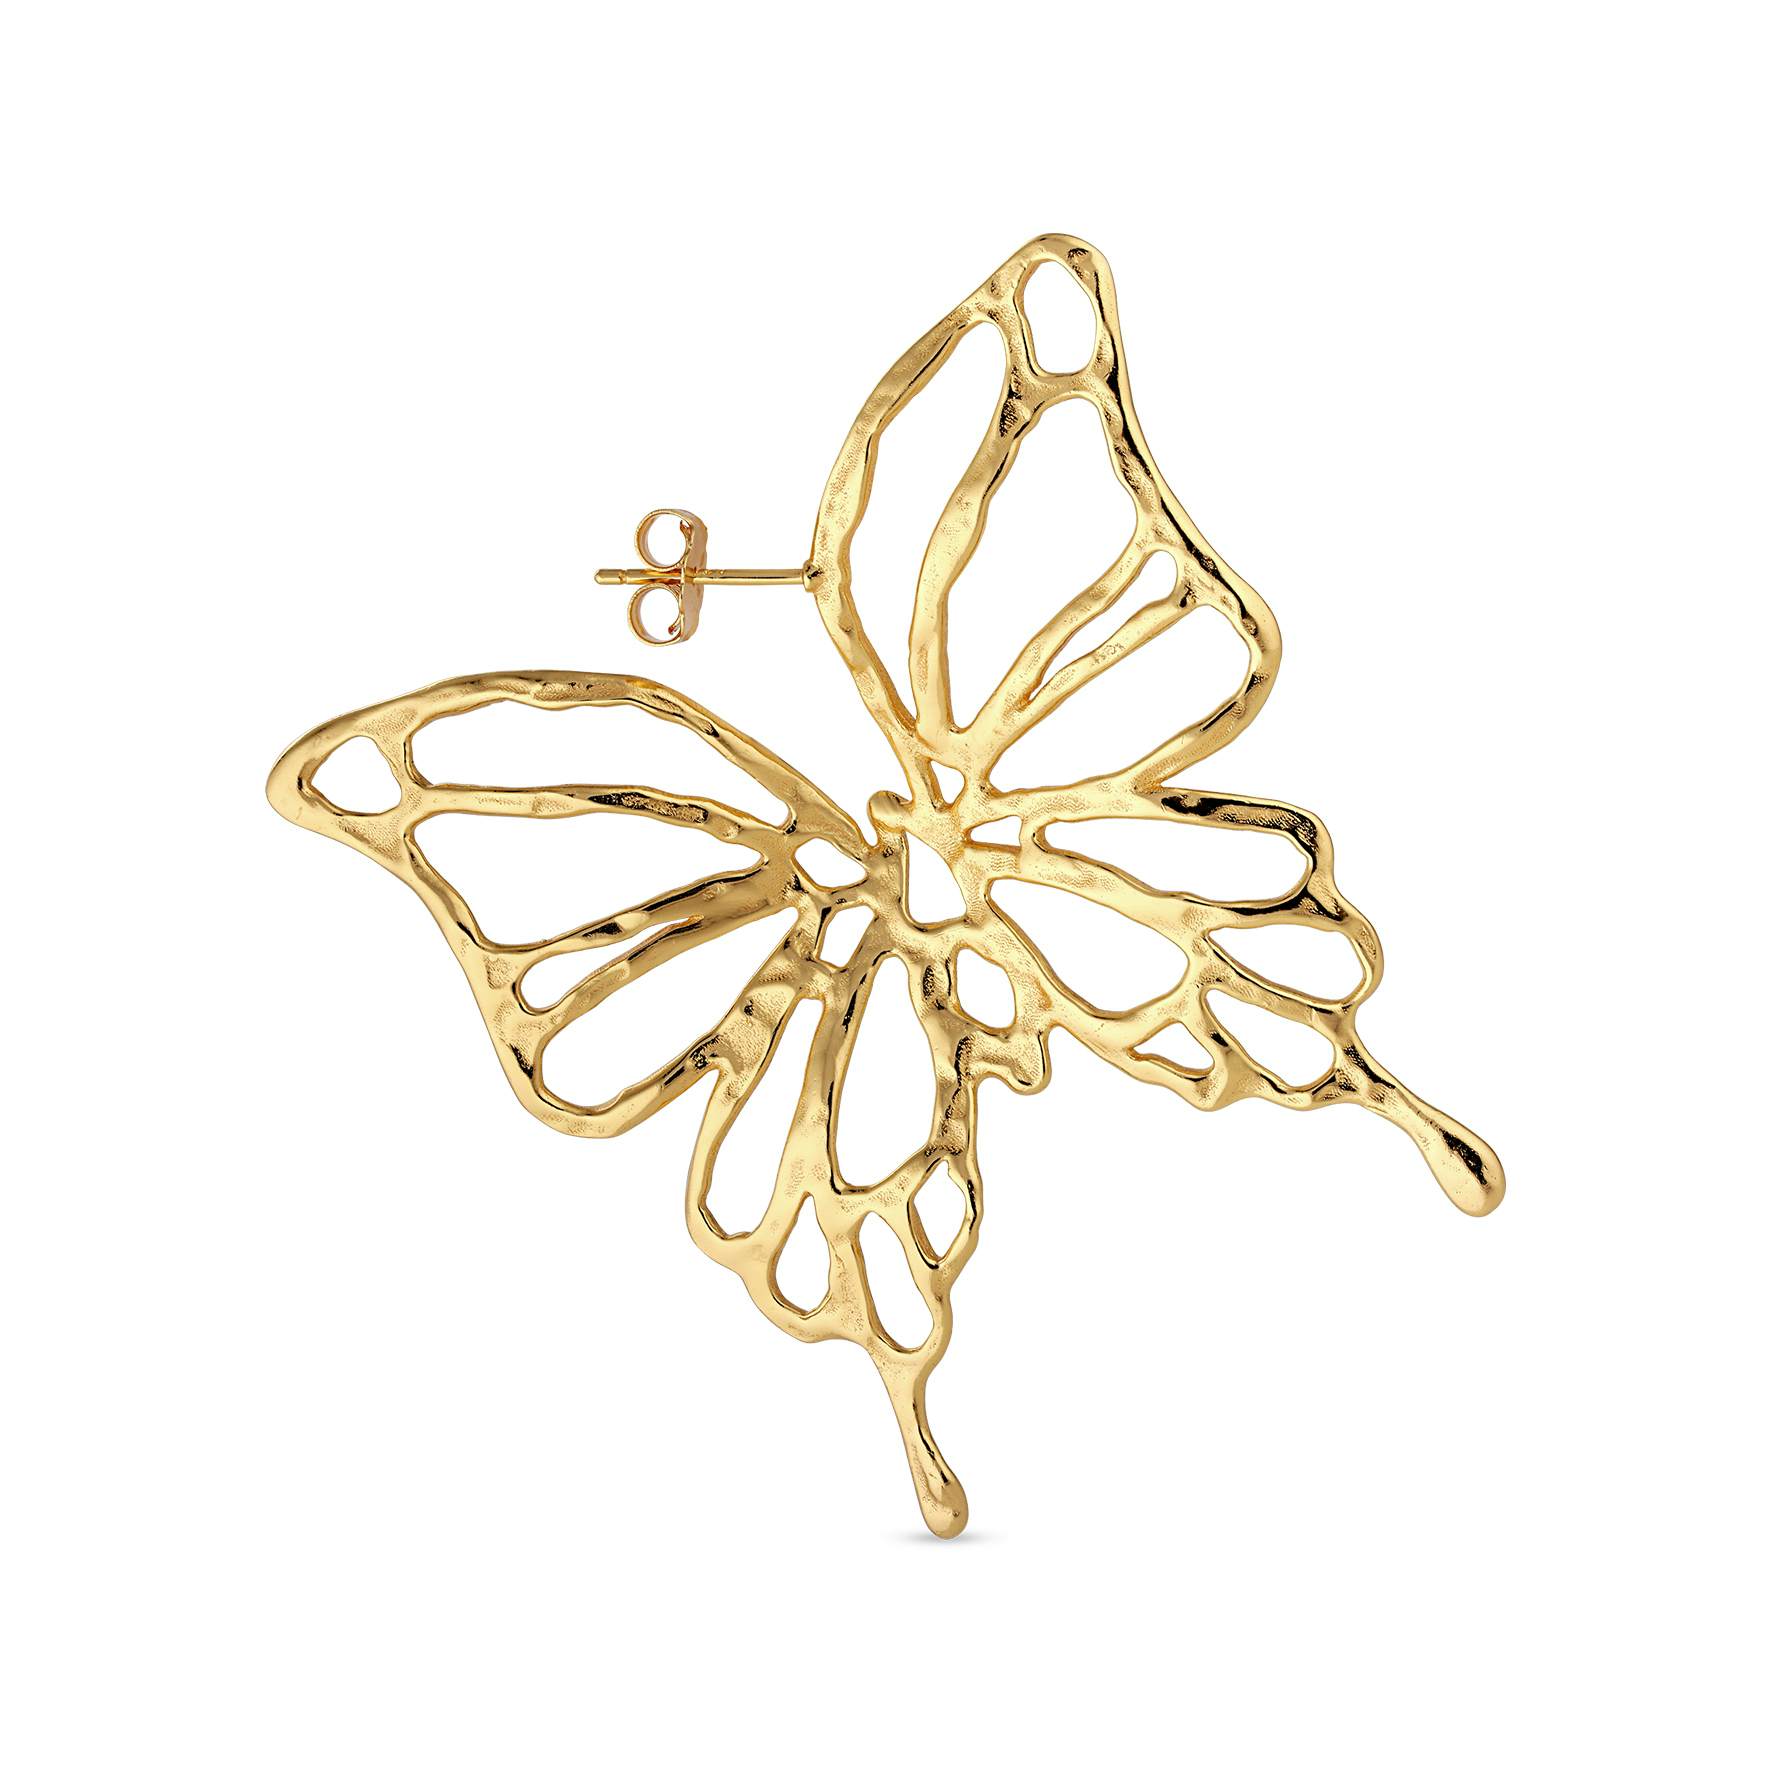 Big Butterfly Earring from Jane Kønig in Goldplated-Silver Sterling 925